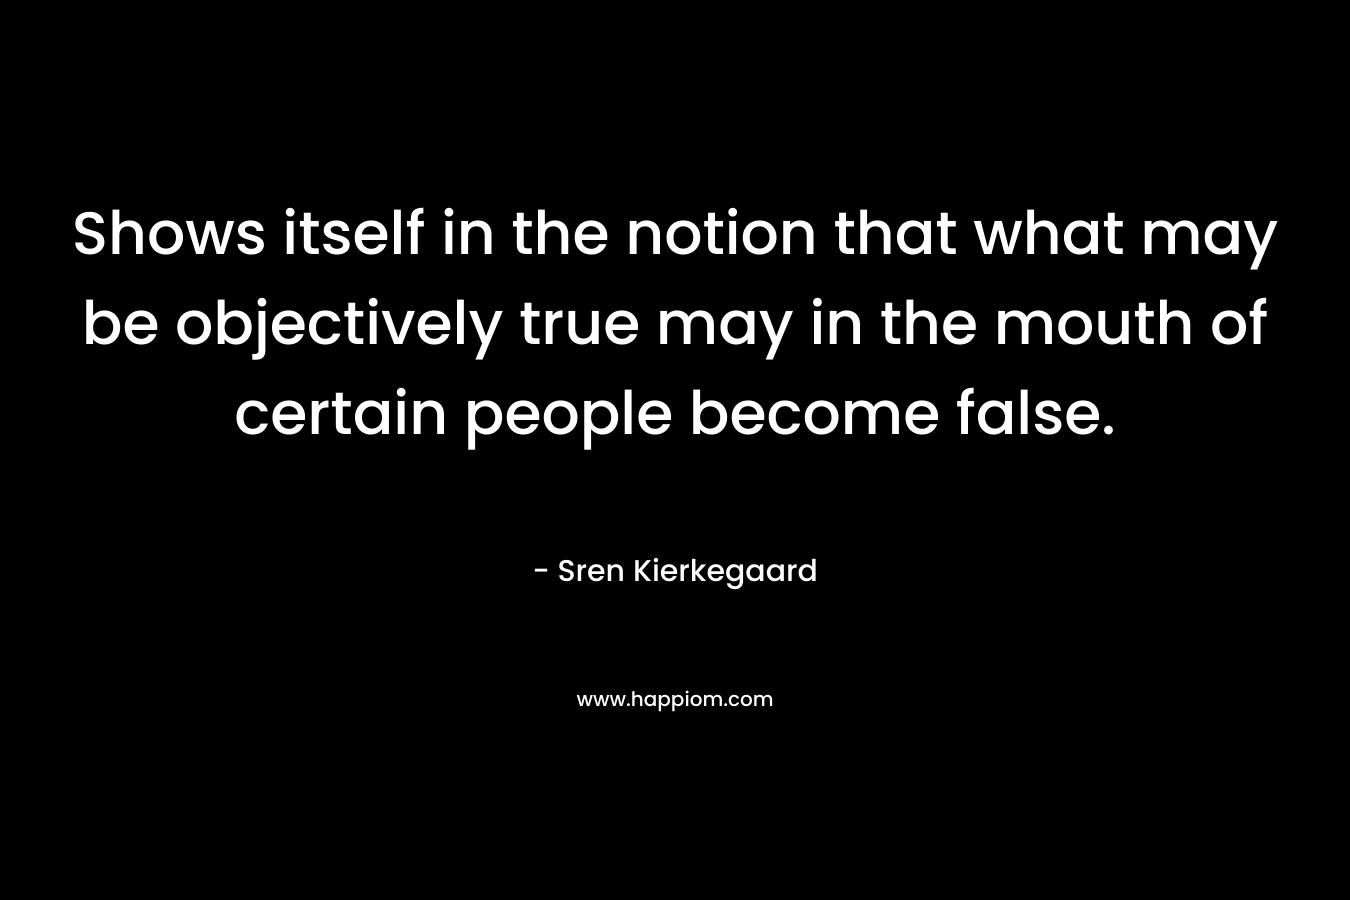 Shows itself in the notion that what may be objectively true may in the mouth of certain people become false.